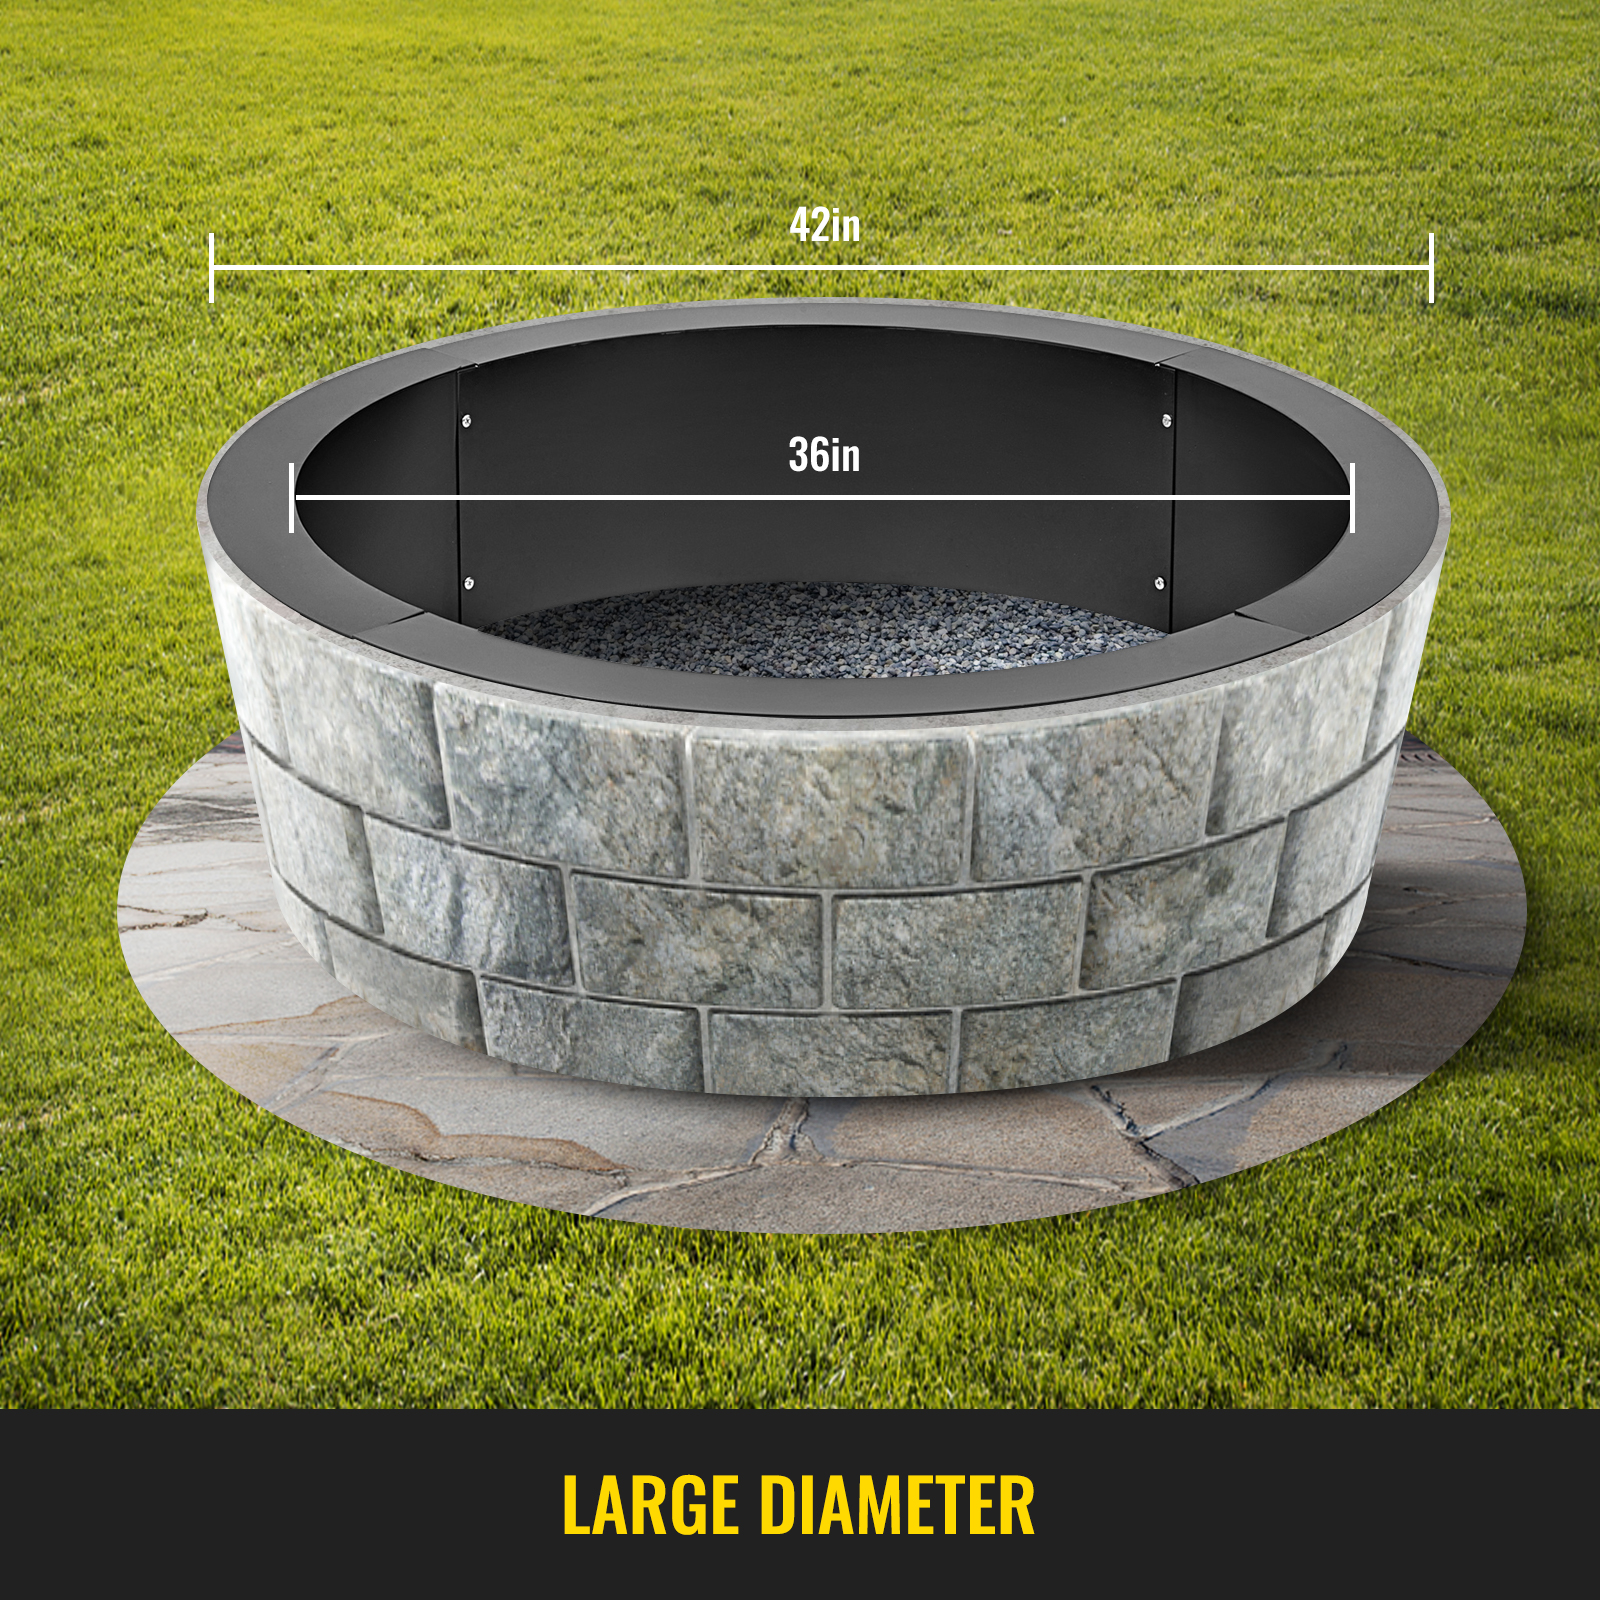 Cooking Grate Campfire Pit Park Bbq, Steel Fire Pit Ring With Cooking Grates